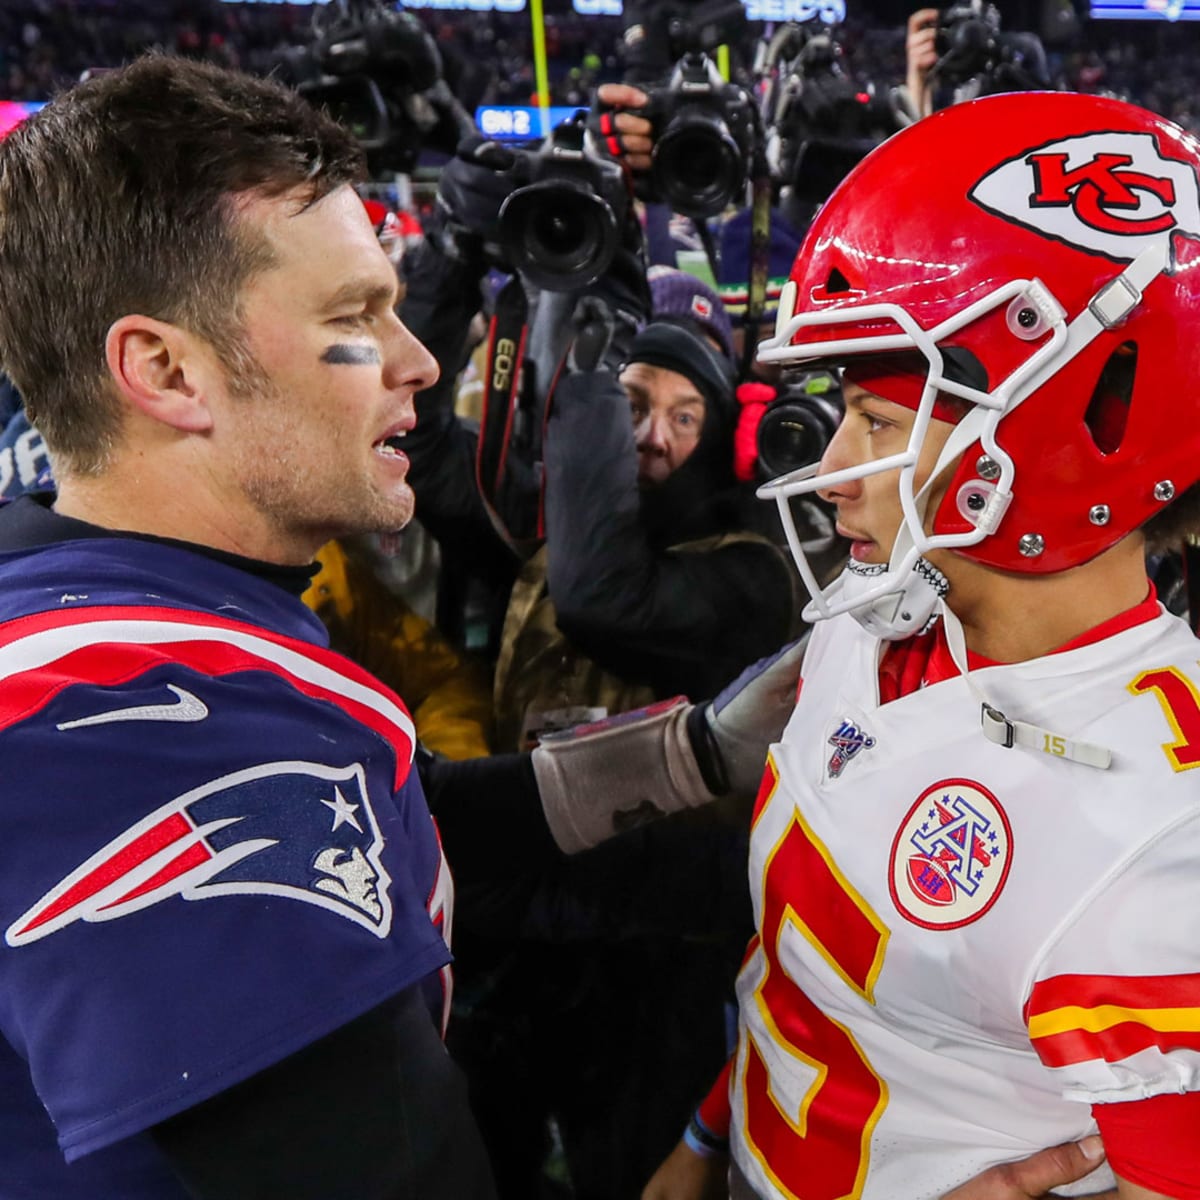 The 10 Reasons Patrick Mahomes Will Become the GOAT - Pro Sports